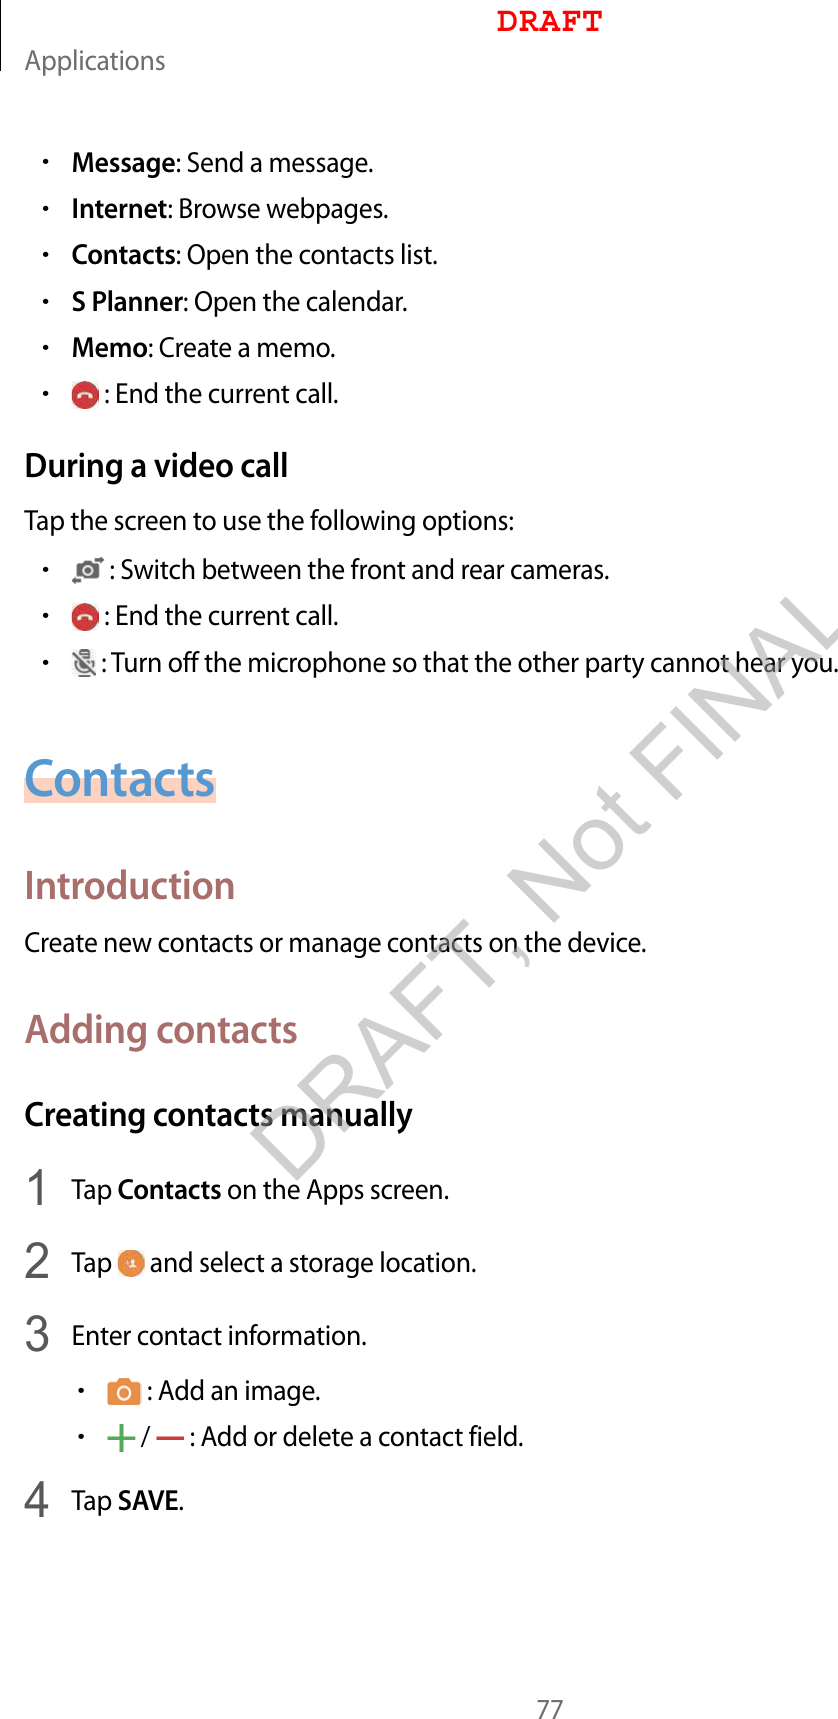 Applications77•Message: Send a message.•Internet: Browse webpages.•Contacts: Open the contacts list.•S Planner: Open the calendar.•Memo: Create a memo.• : End the current call.During a video callTap the screen to use the following options:• : Switch between the front and rear cameras.• : End the current call.• : Turn off the microphone so that the other party cannot hear you.ContactsIntroductionCreate new contacts or manage contacts on the device.Adding contactsCreating contacts manually1  Tap Contacts on the Apps screen.2  Tap   and select a storage location.3  Enter contact information.• : Add an image.• /   : Add or delete a contact field.4  Tap SAVE.DRAFTDRAFT, Not FINAL